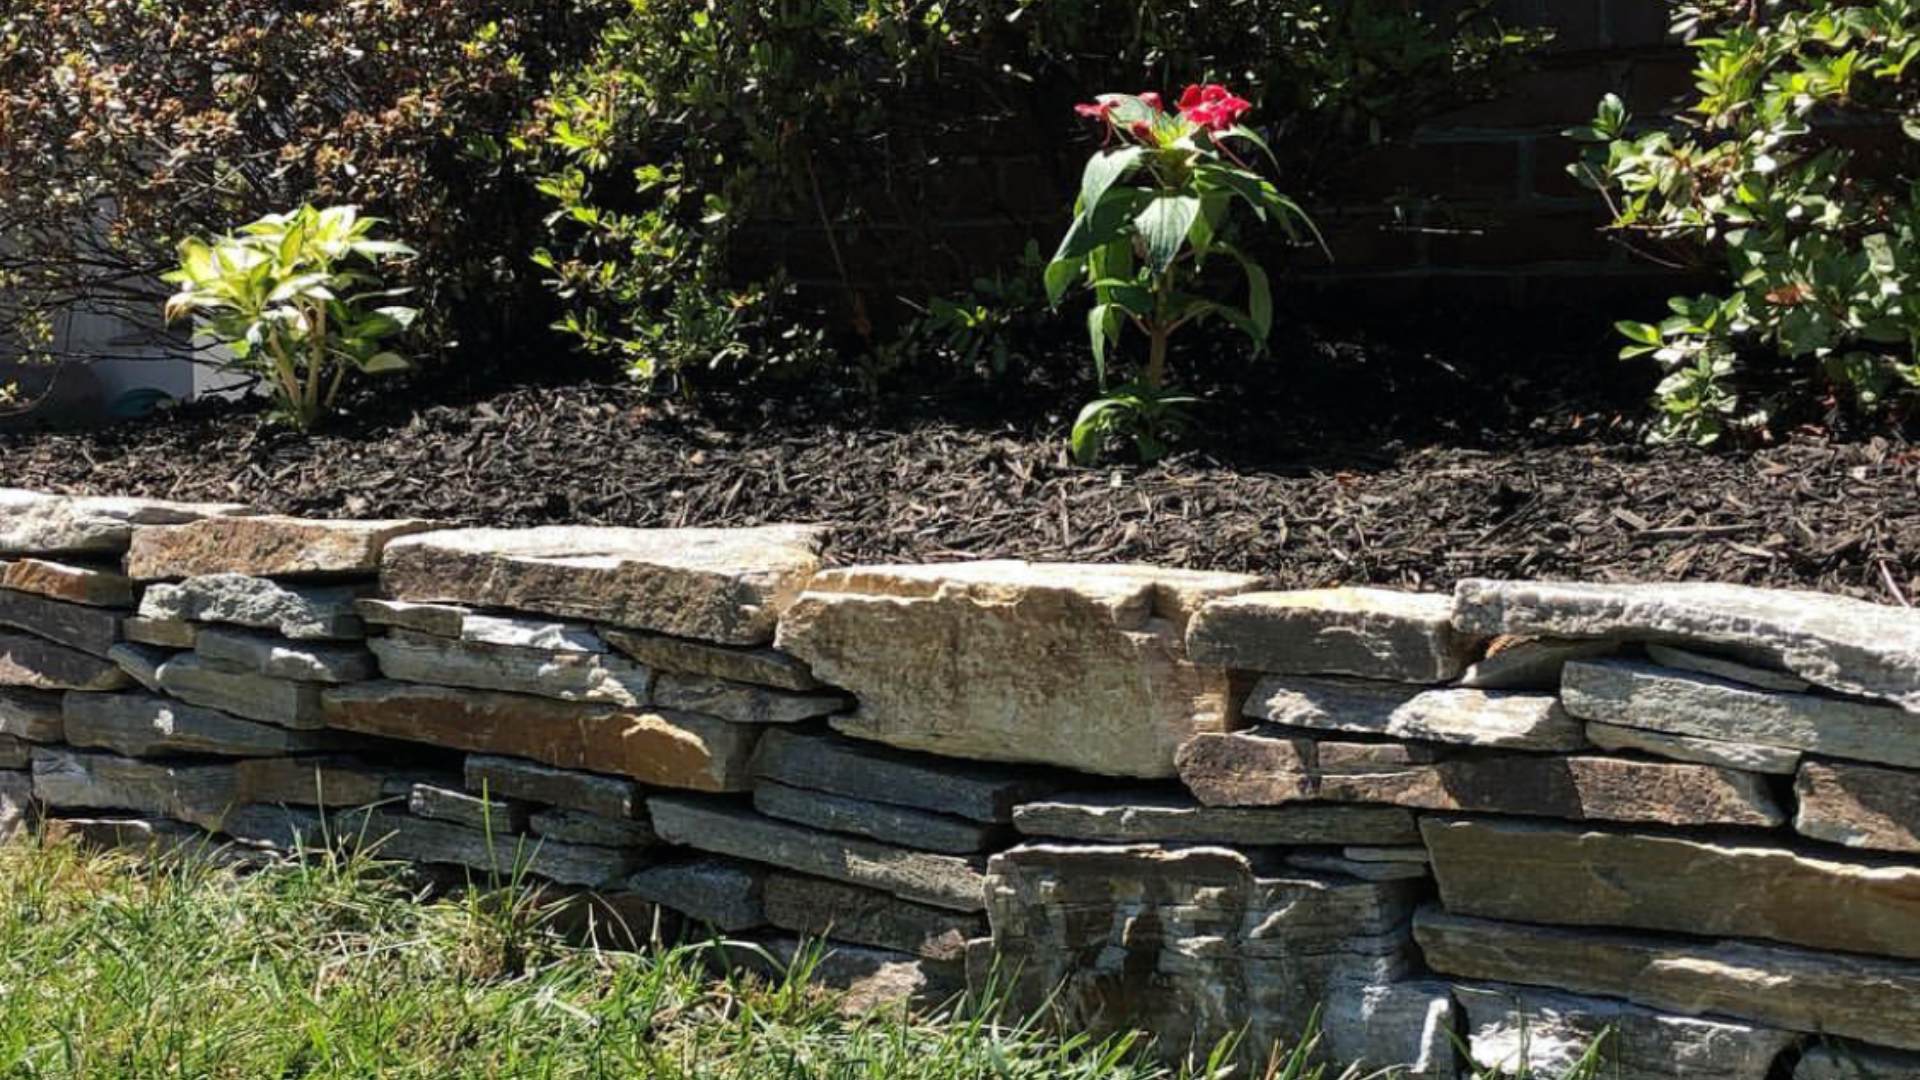 Retaining wall for landscape bed in Leesburg, VA.